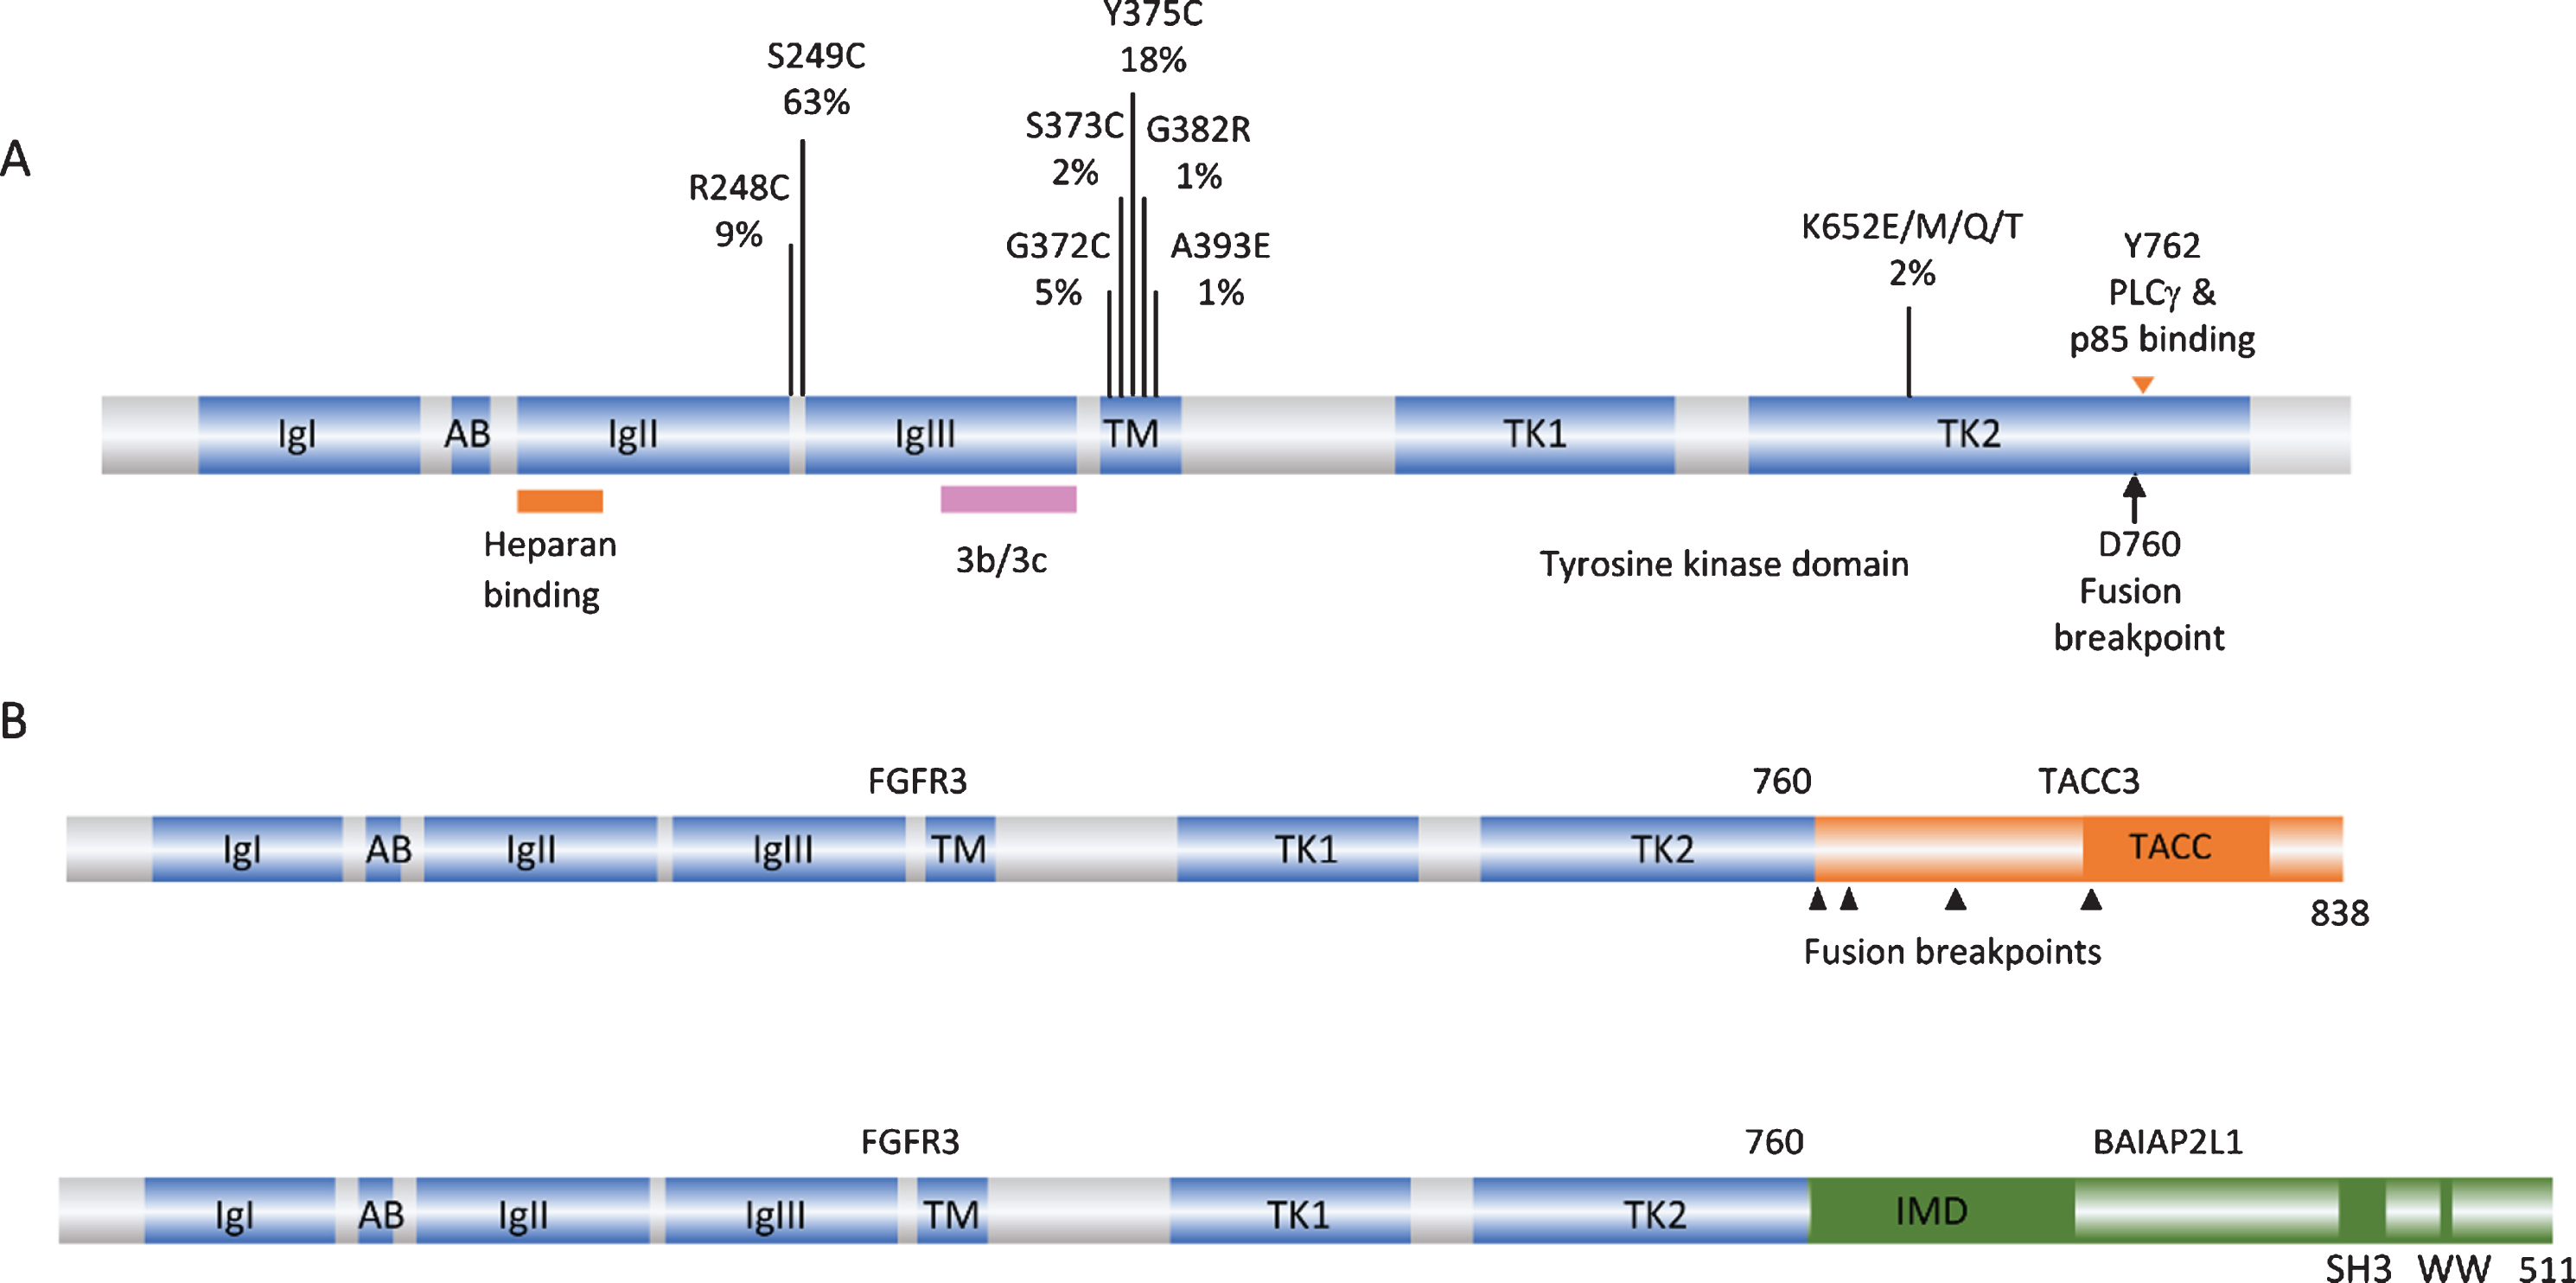 FGFR3 point mutations and translocations in bladder cancer. A. Structure of FGFR3 isoform 3b protein showing position of point mutations. Mutation data taken from tumors of all grades and stages (COSMIC, June 2020). IgI, IgII, IgIII: immunoglobulin-like domains. AB: acid box. TK1 and TK2: split tyrosine kinase domain. 3b/3c: region of exons 8 and 9 where alternative splicing generates isoforms 3b and 3c. B. Examples of FGFR3 fusion proteins identified in bladder tumors. TACC: transforming acid coiled-coil. IMD: IRDp53/MIM homology. SH3: src homology.